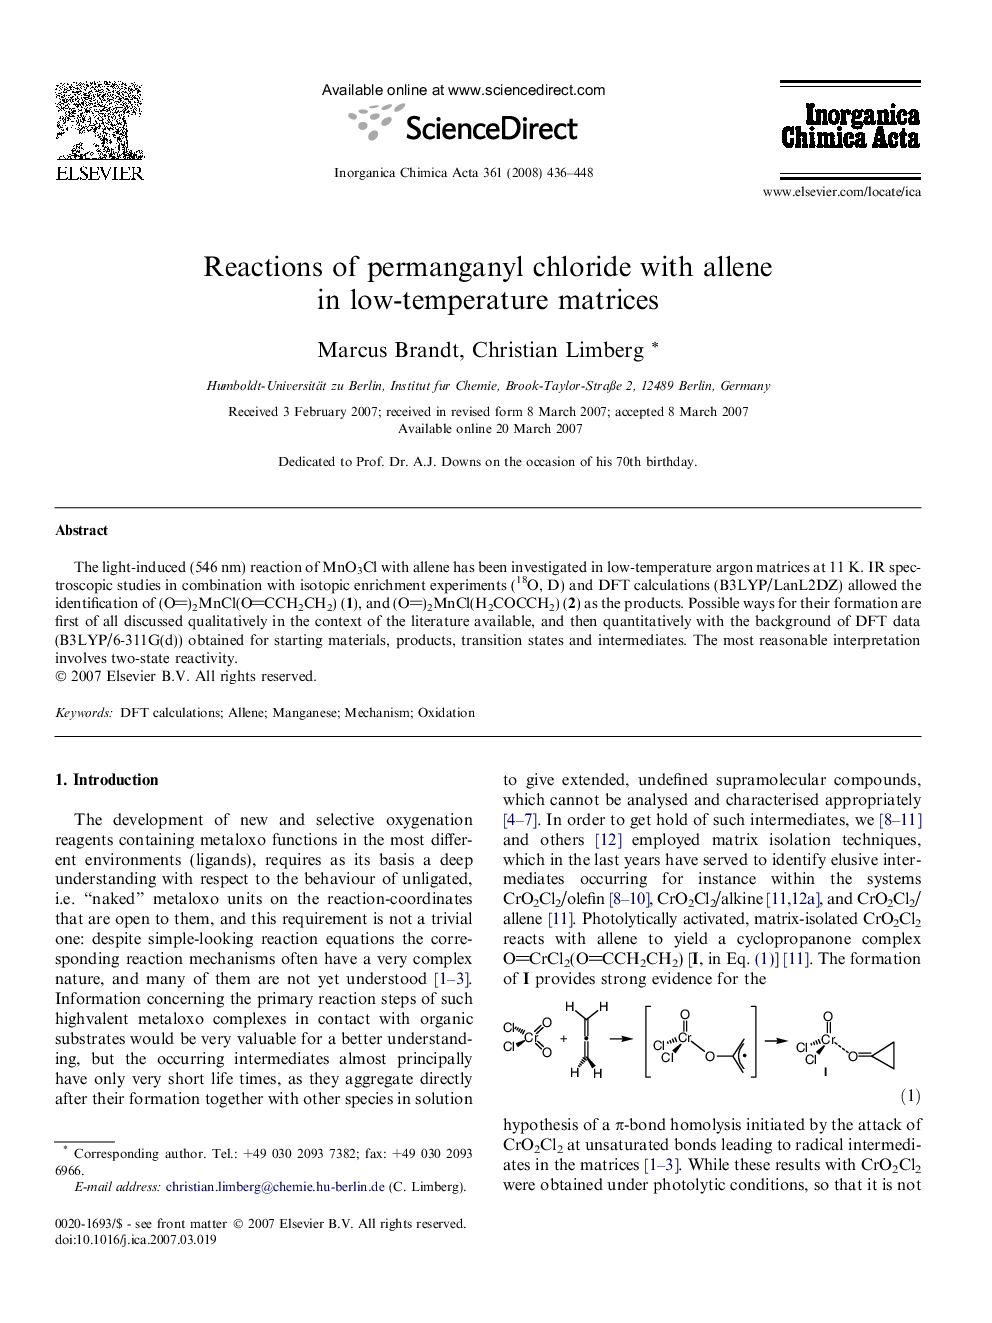 Reactions of permanganyl chloride with allene in low-temperature matrices